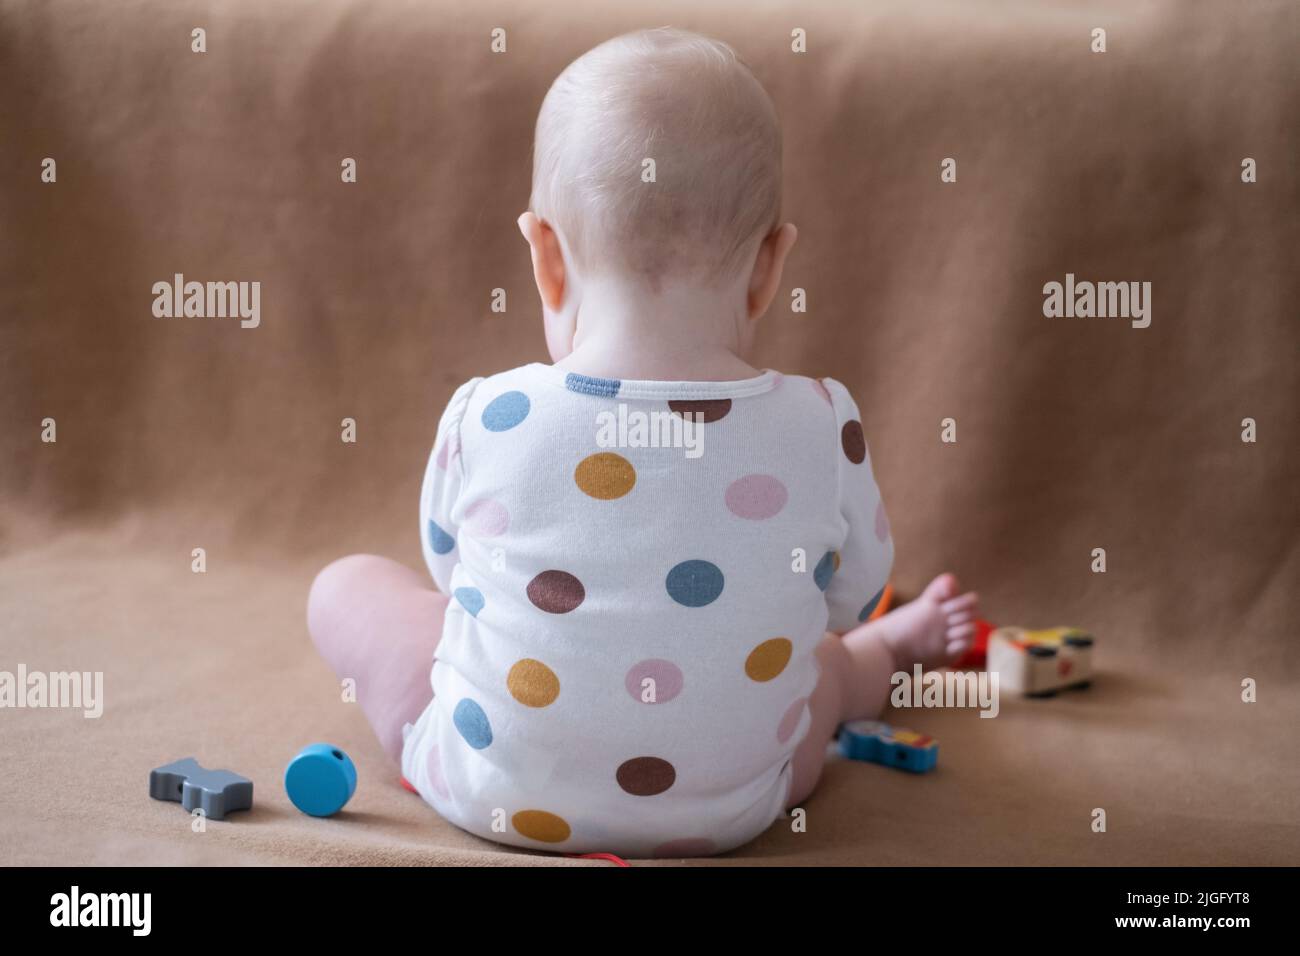 8 month old caucasian baby girl playing with toy at home Stock Photo